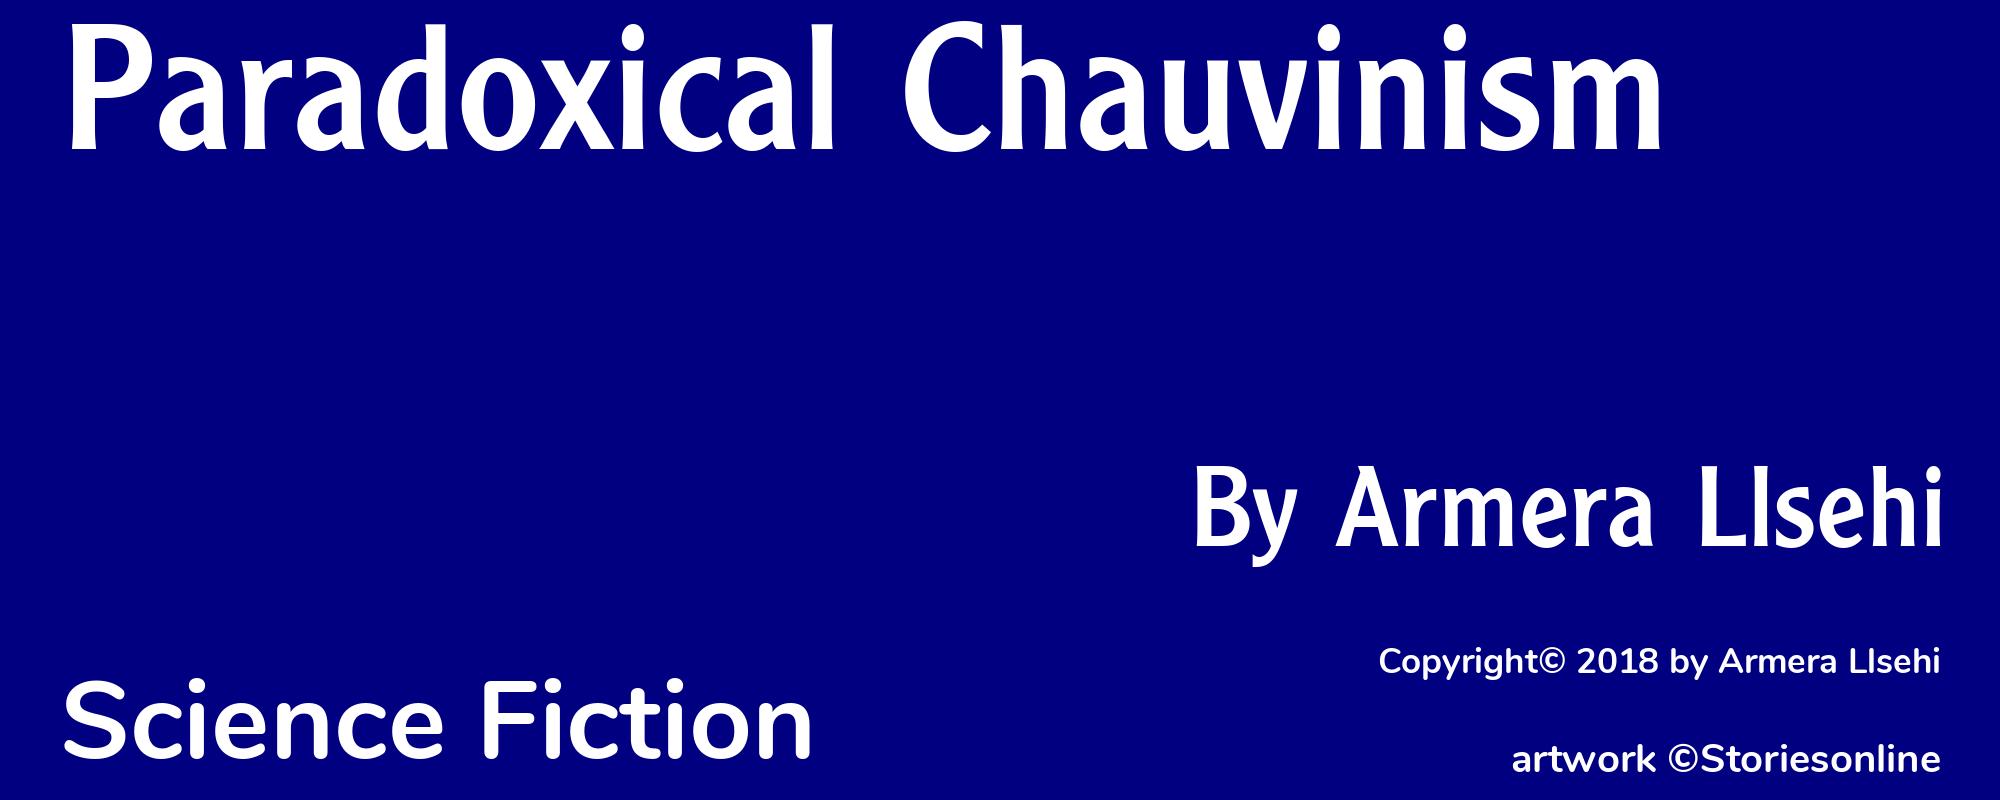 Paradoxical Chauvinism - Cover